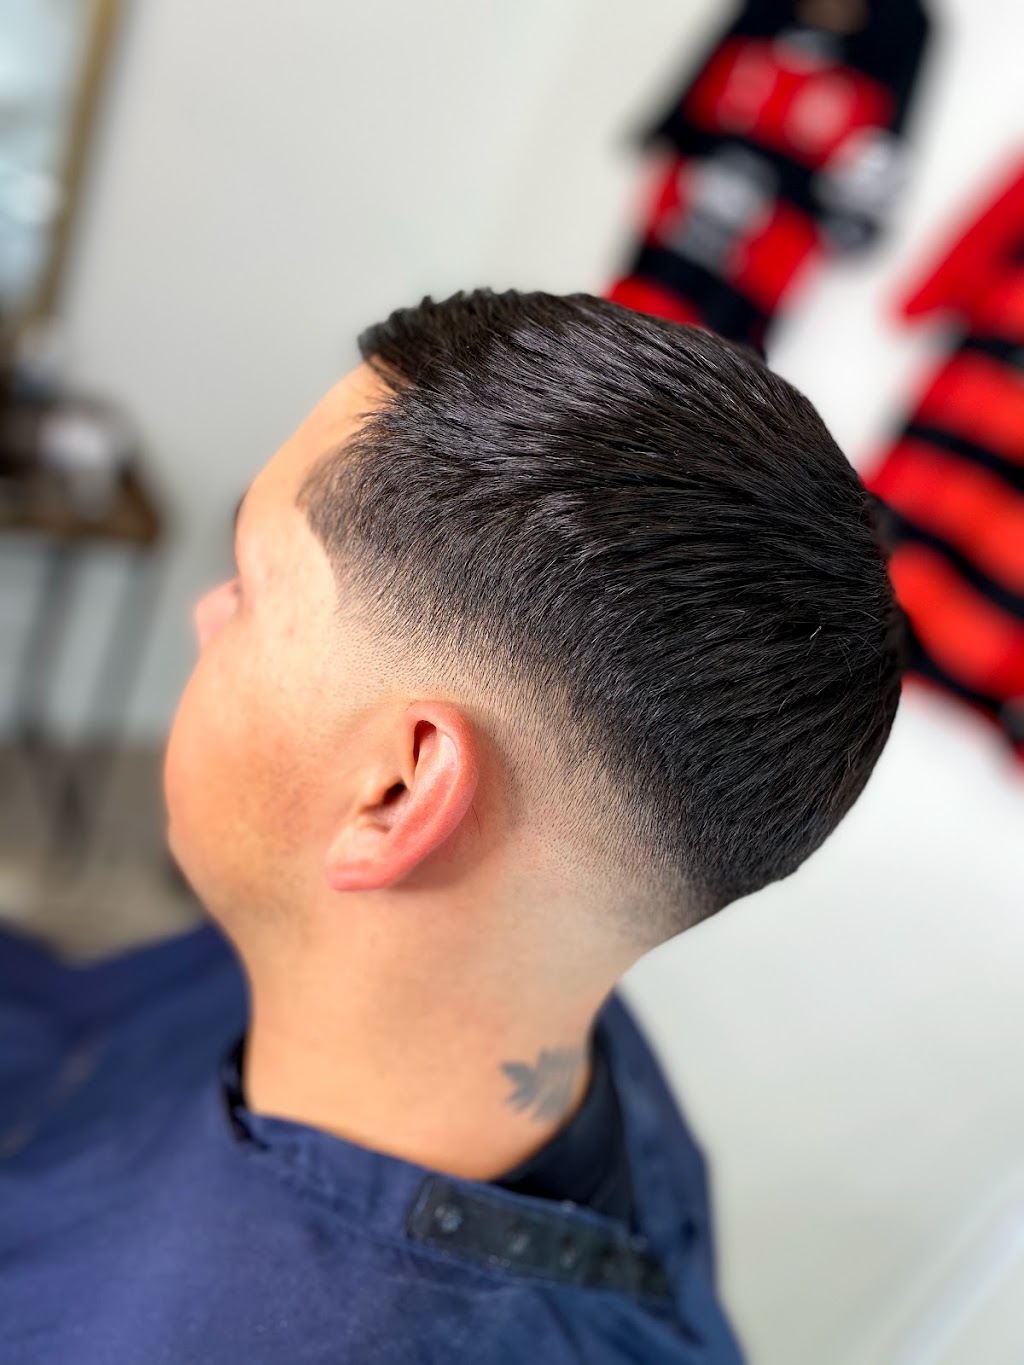 On The Block Barbershop | hair care | 65/9 Springfield College Dr, Springfield QLD 4300, Australia | 0412165637 OR +61 412 165 637